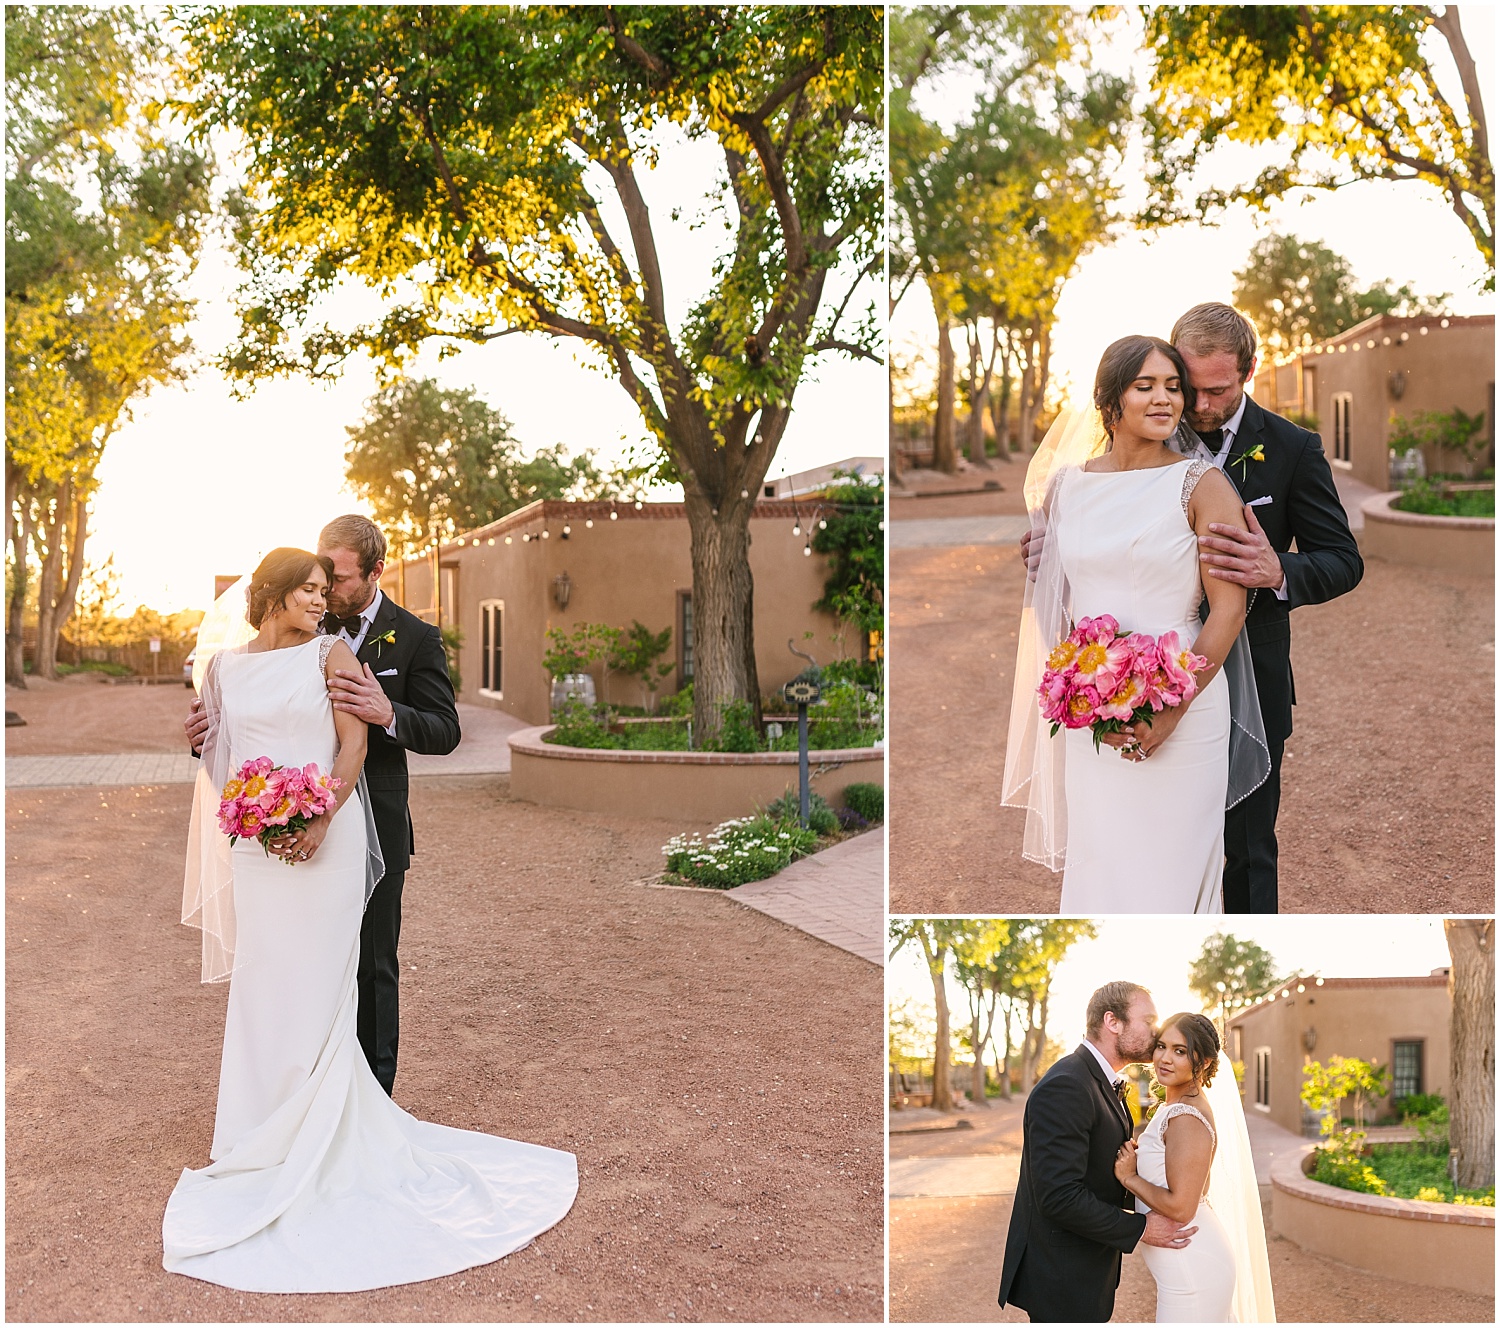 Golden hour wedding portraits at Casa Perea Art Space in Corrales New Mexico